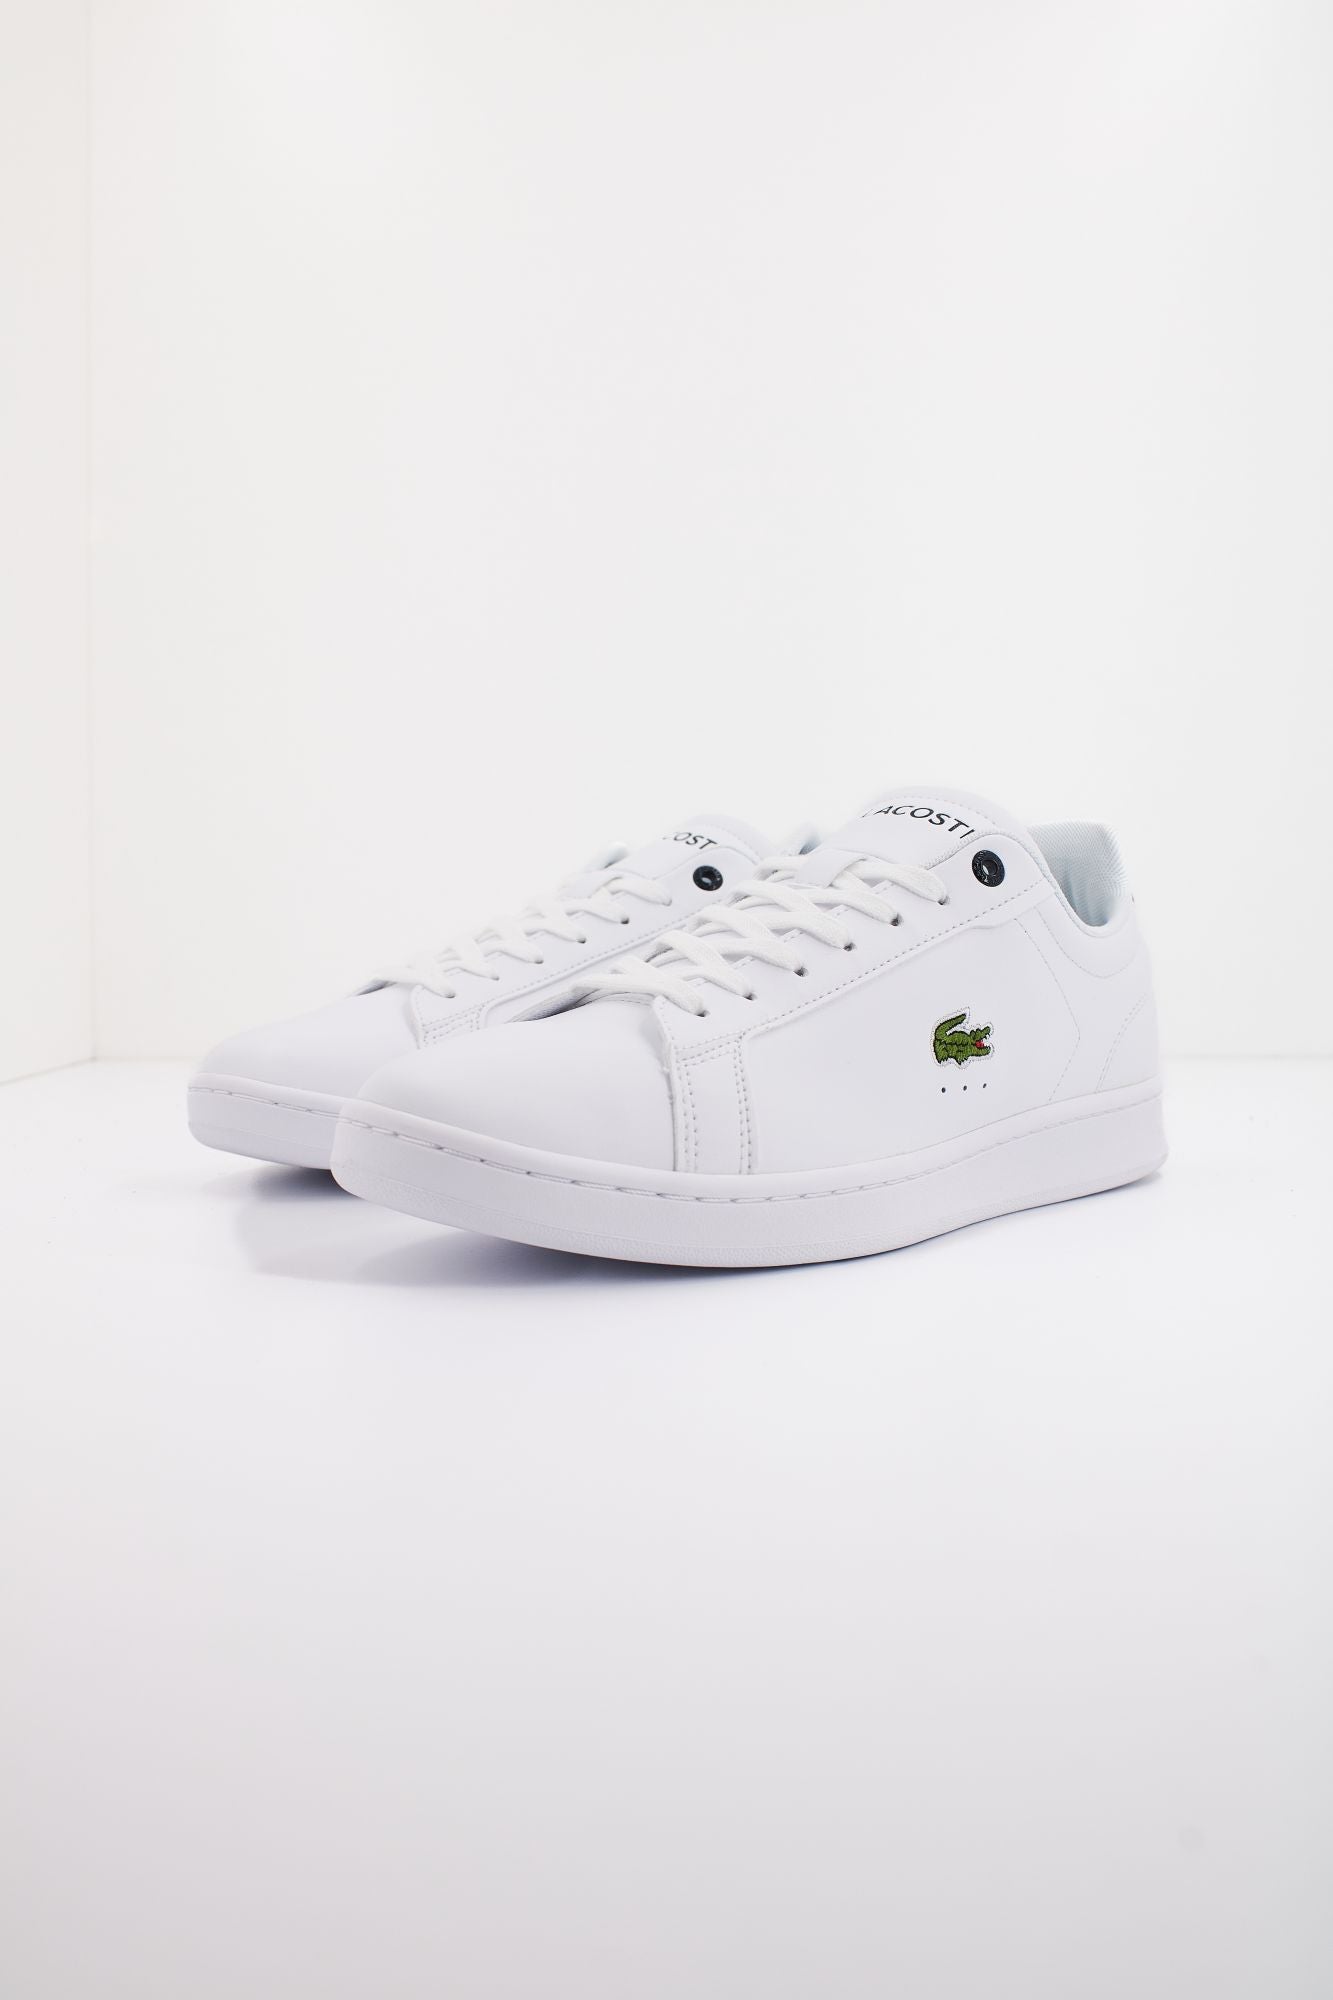 LACOSTE CARNABY PRO BL LEATHER TO en color BLANCO (2)